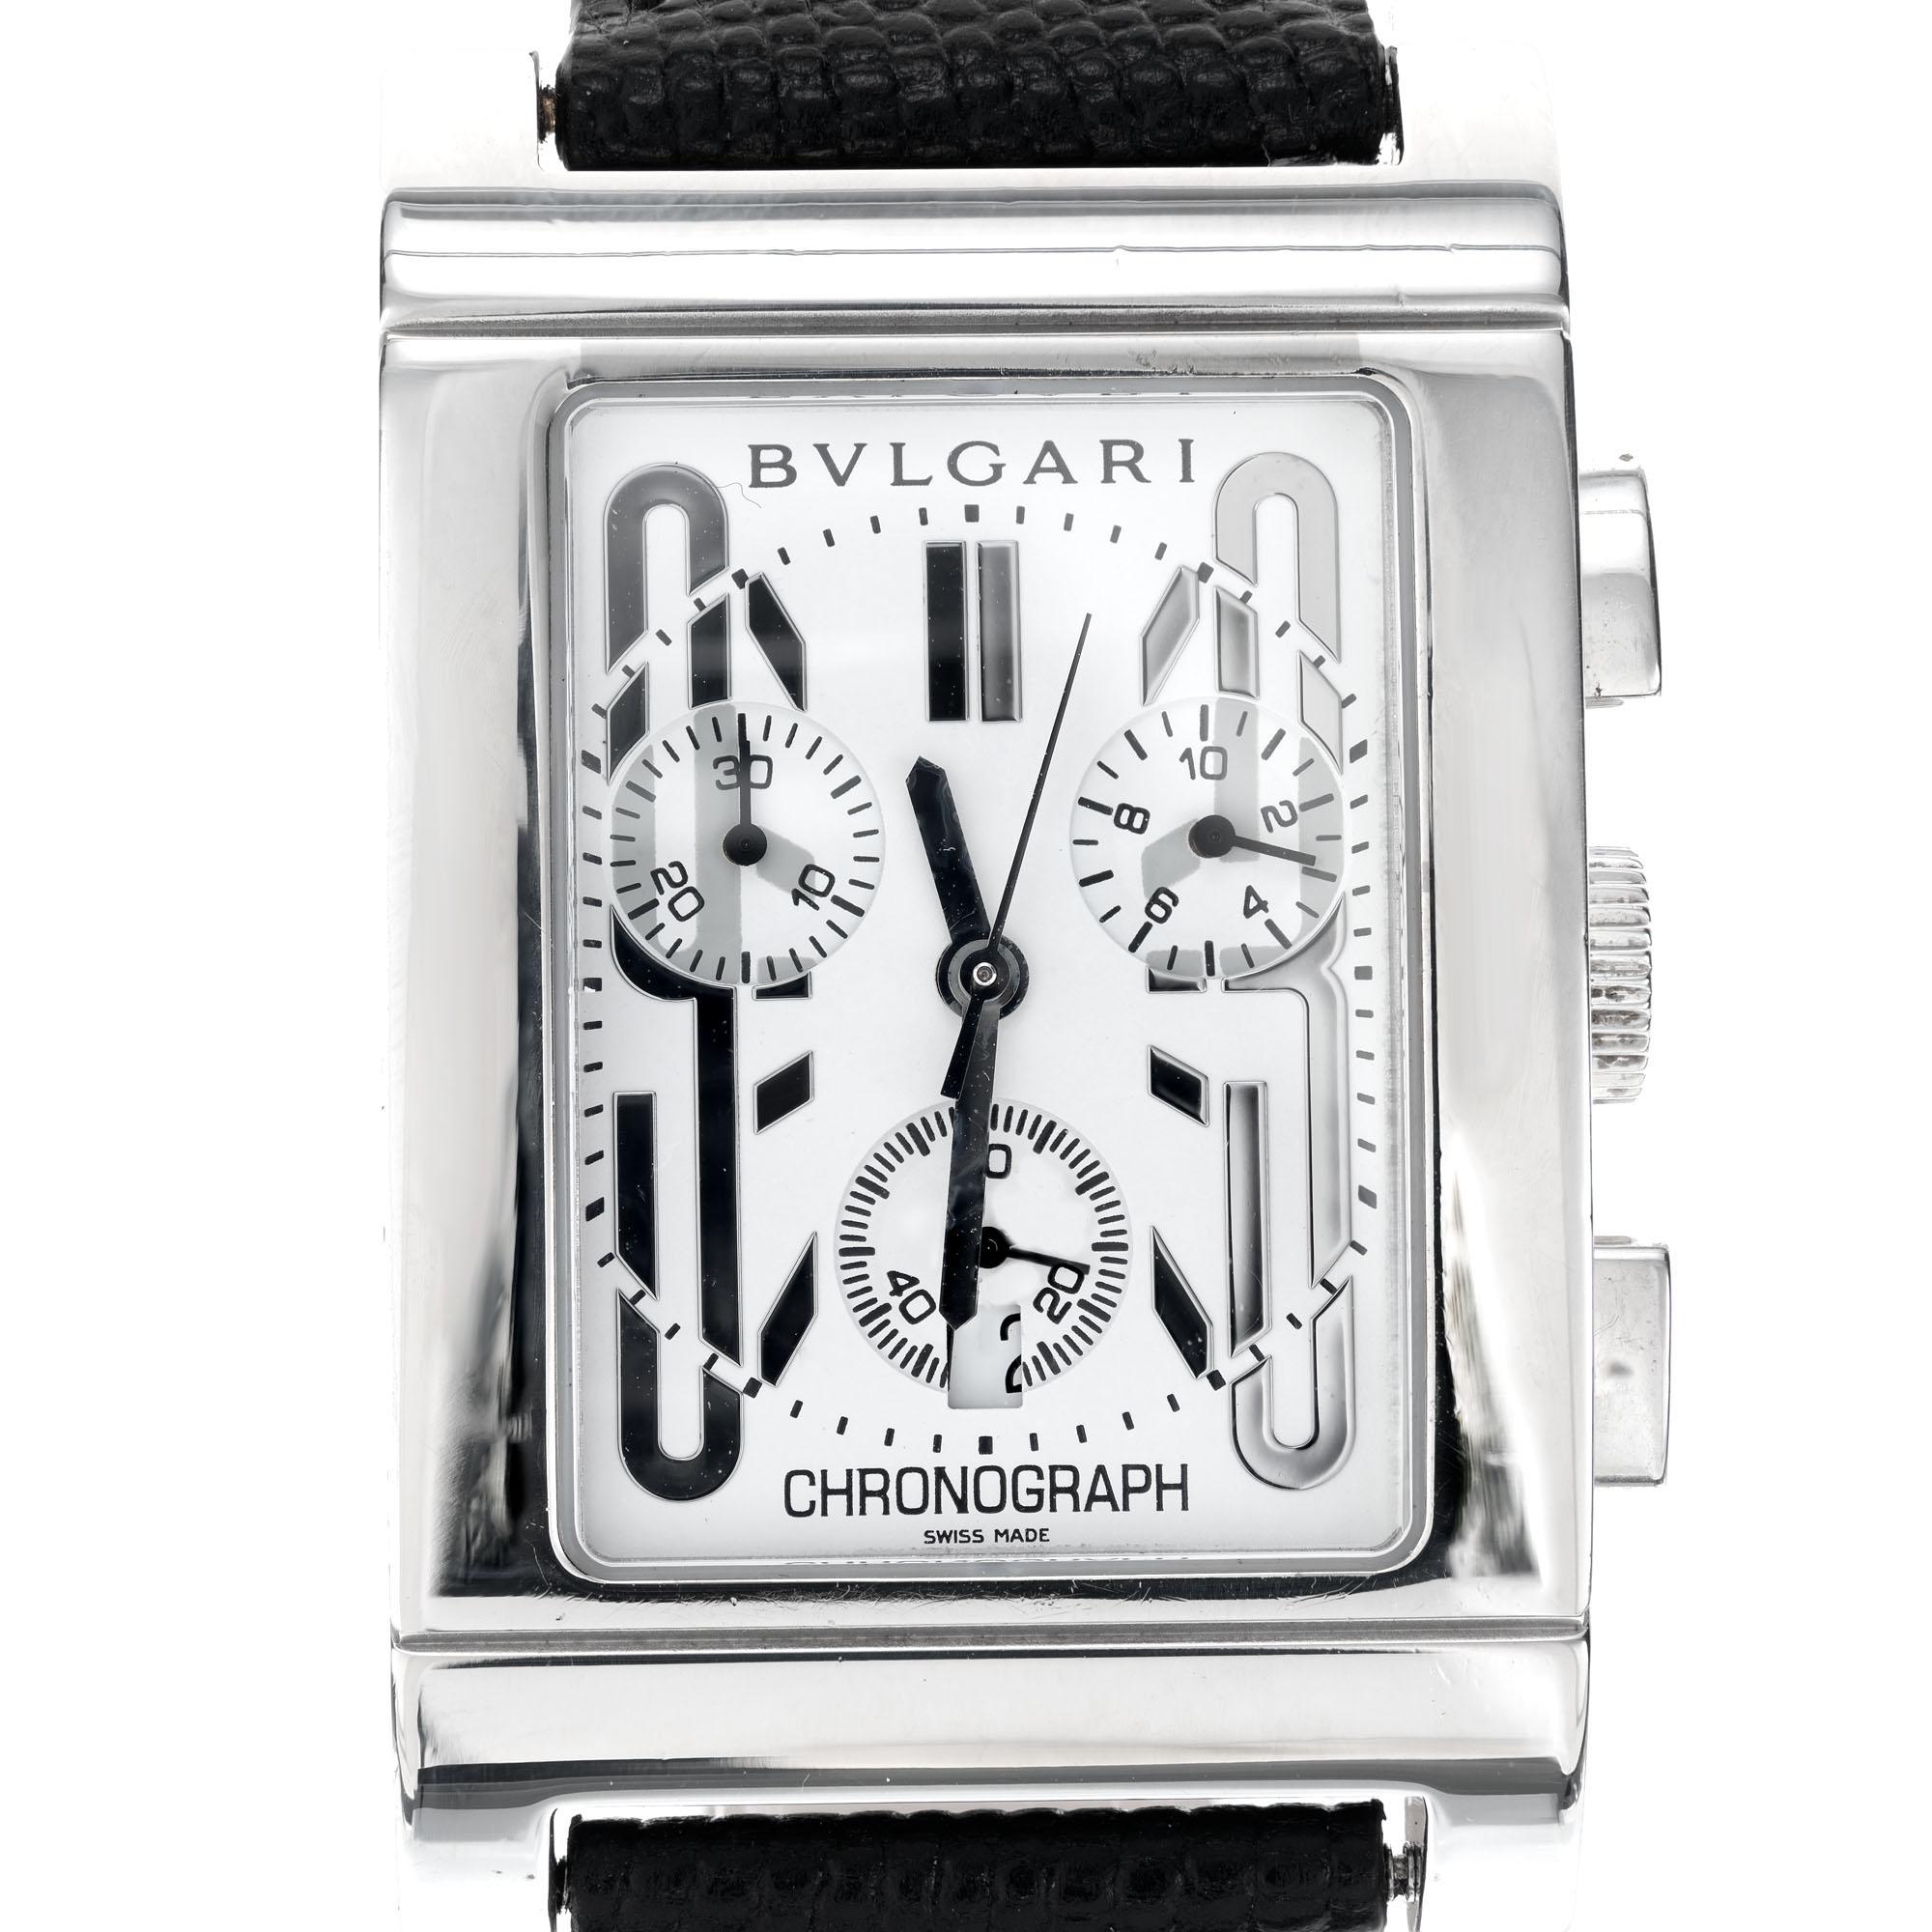 Men's Bvlgari Rettangolo Chronograph Wristwatch. White dial, new strap and new battery. 

Case length: 47.60mm
Width: 29.52mm
Band width at case: 20mm
Case thickness: 9.87mm
Band: Genuine leather
Crystal: Sapphire
Dial: White
Outside case: R+C 495